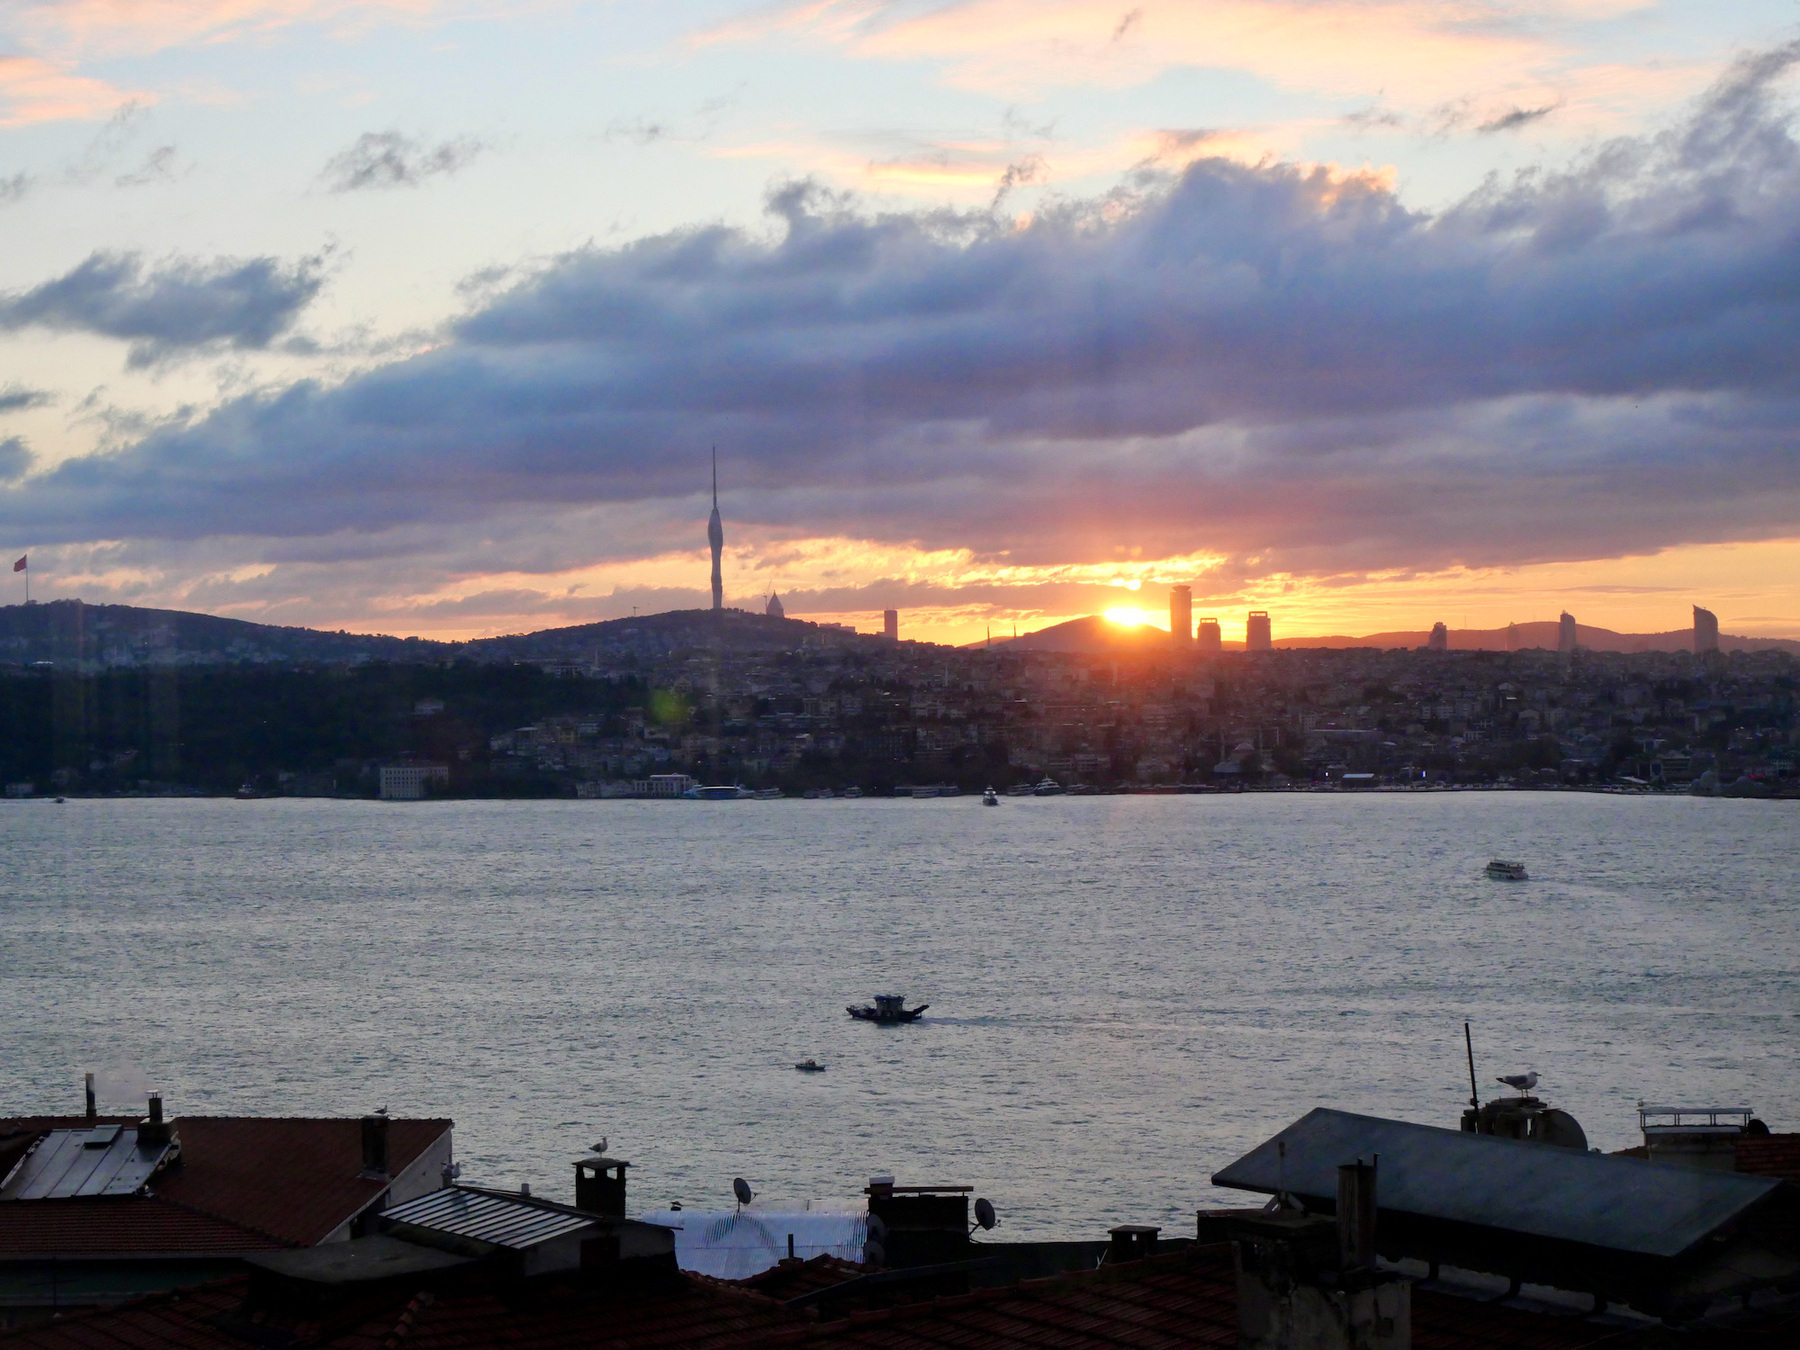 Sun rising over a mountain across a body of water. The silhouette of the Çamlıca Tower is clearly visible.